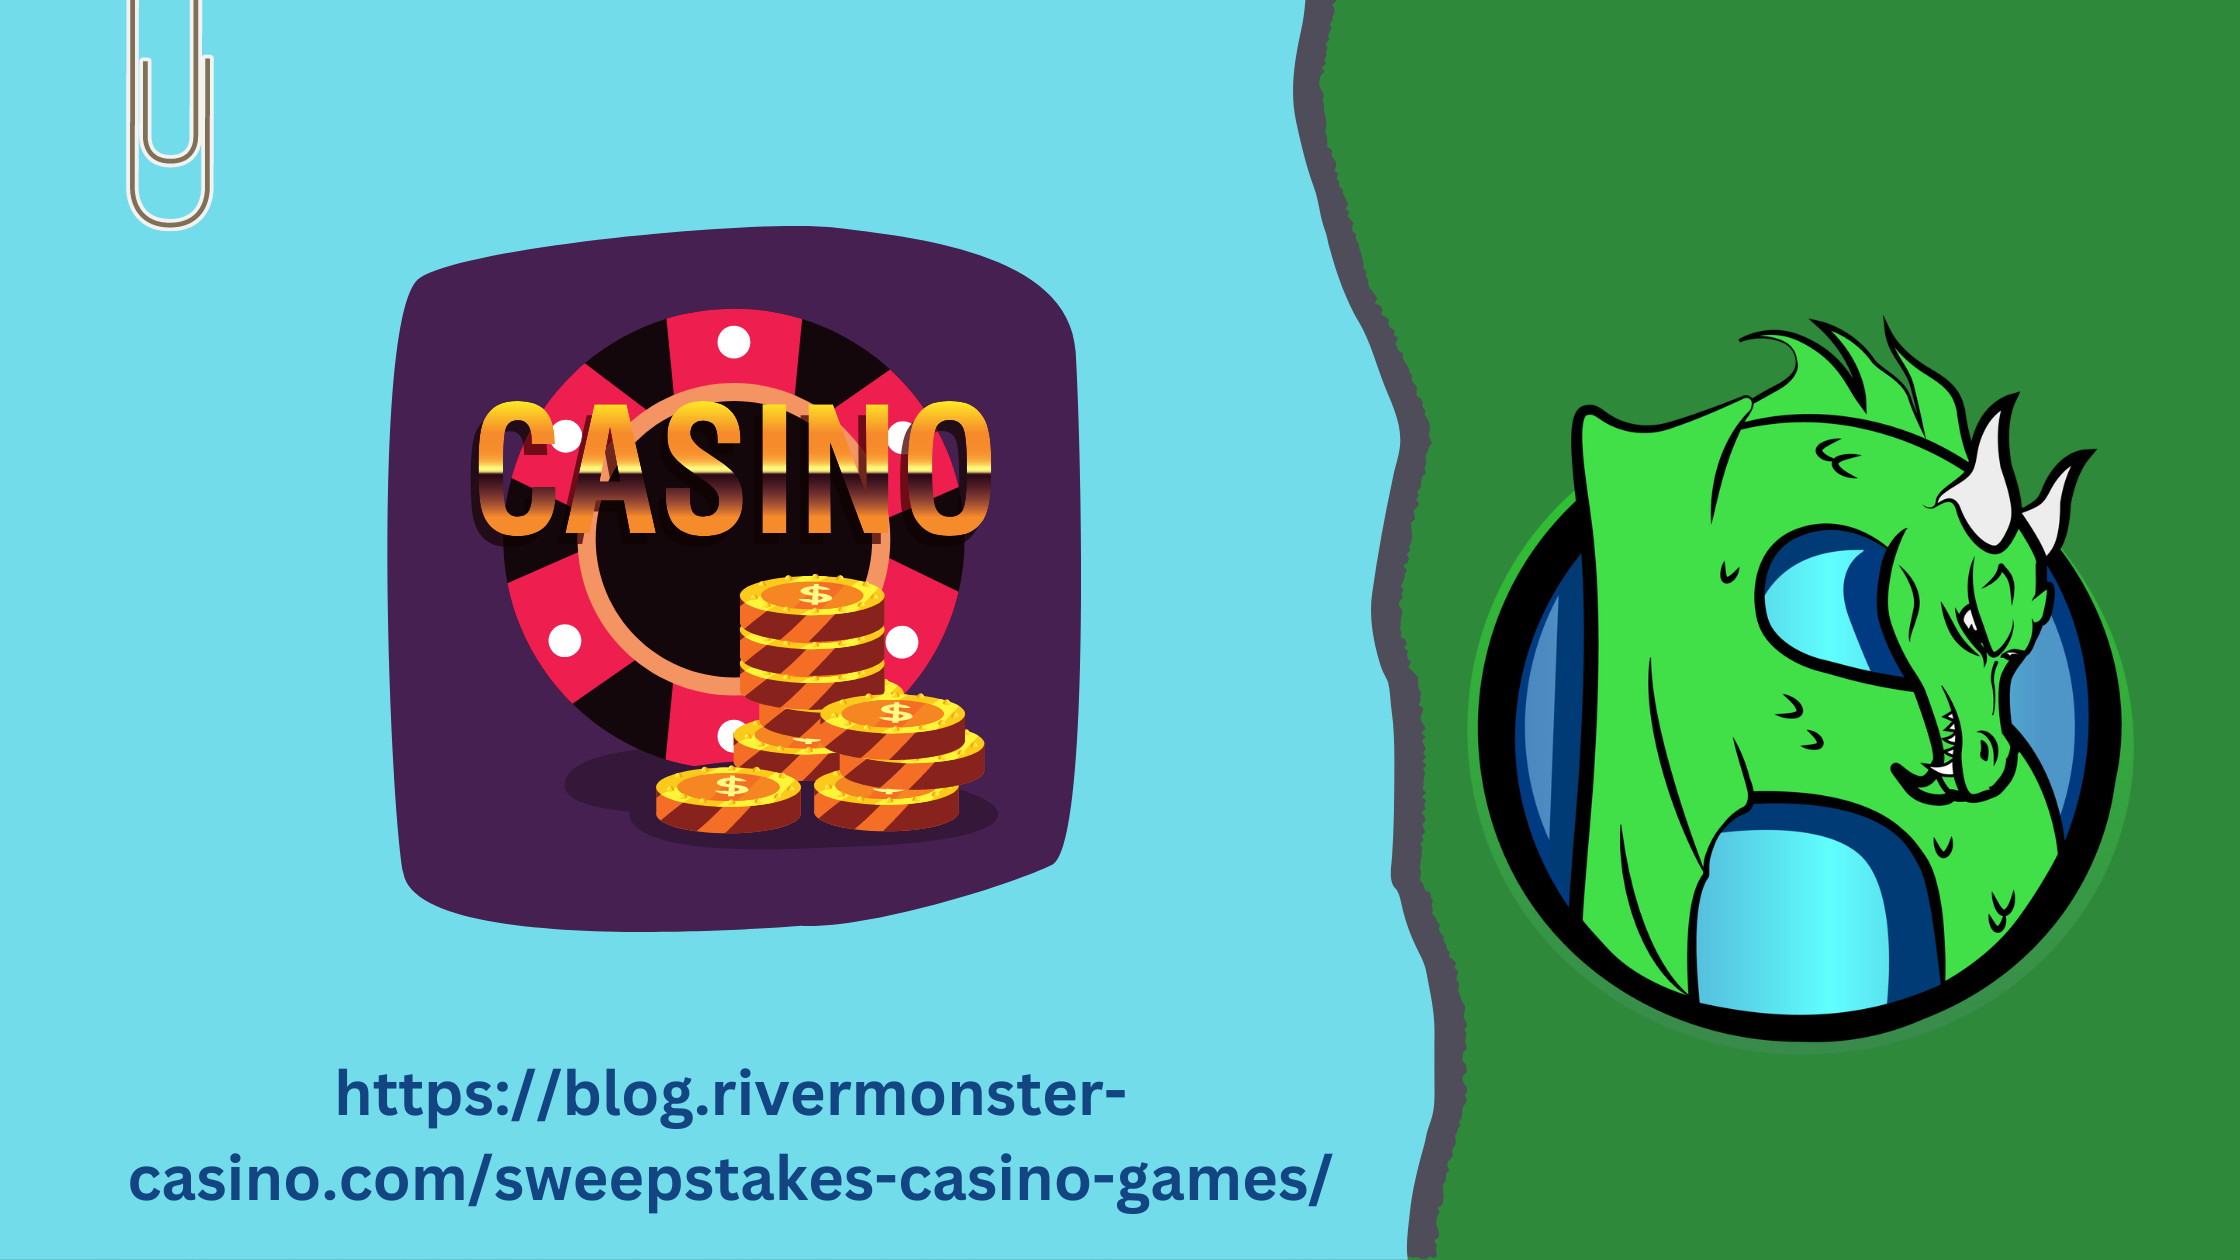 Sweepstakes Casino Games: Spin, Bet, and Win!